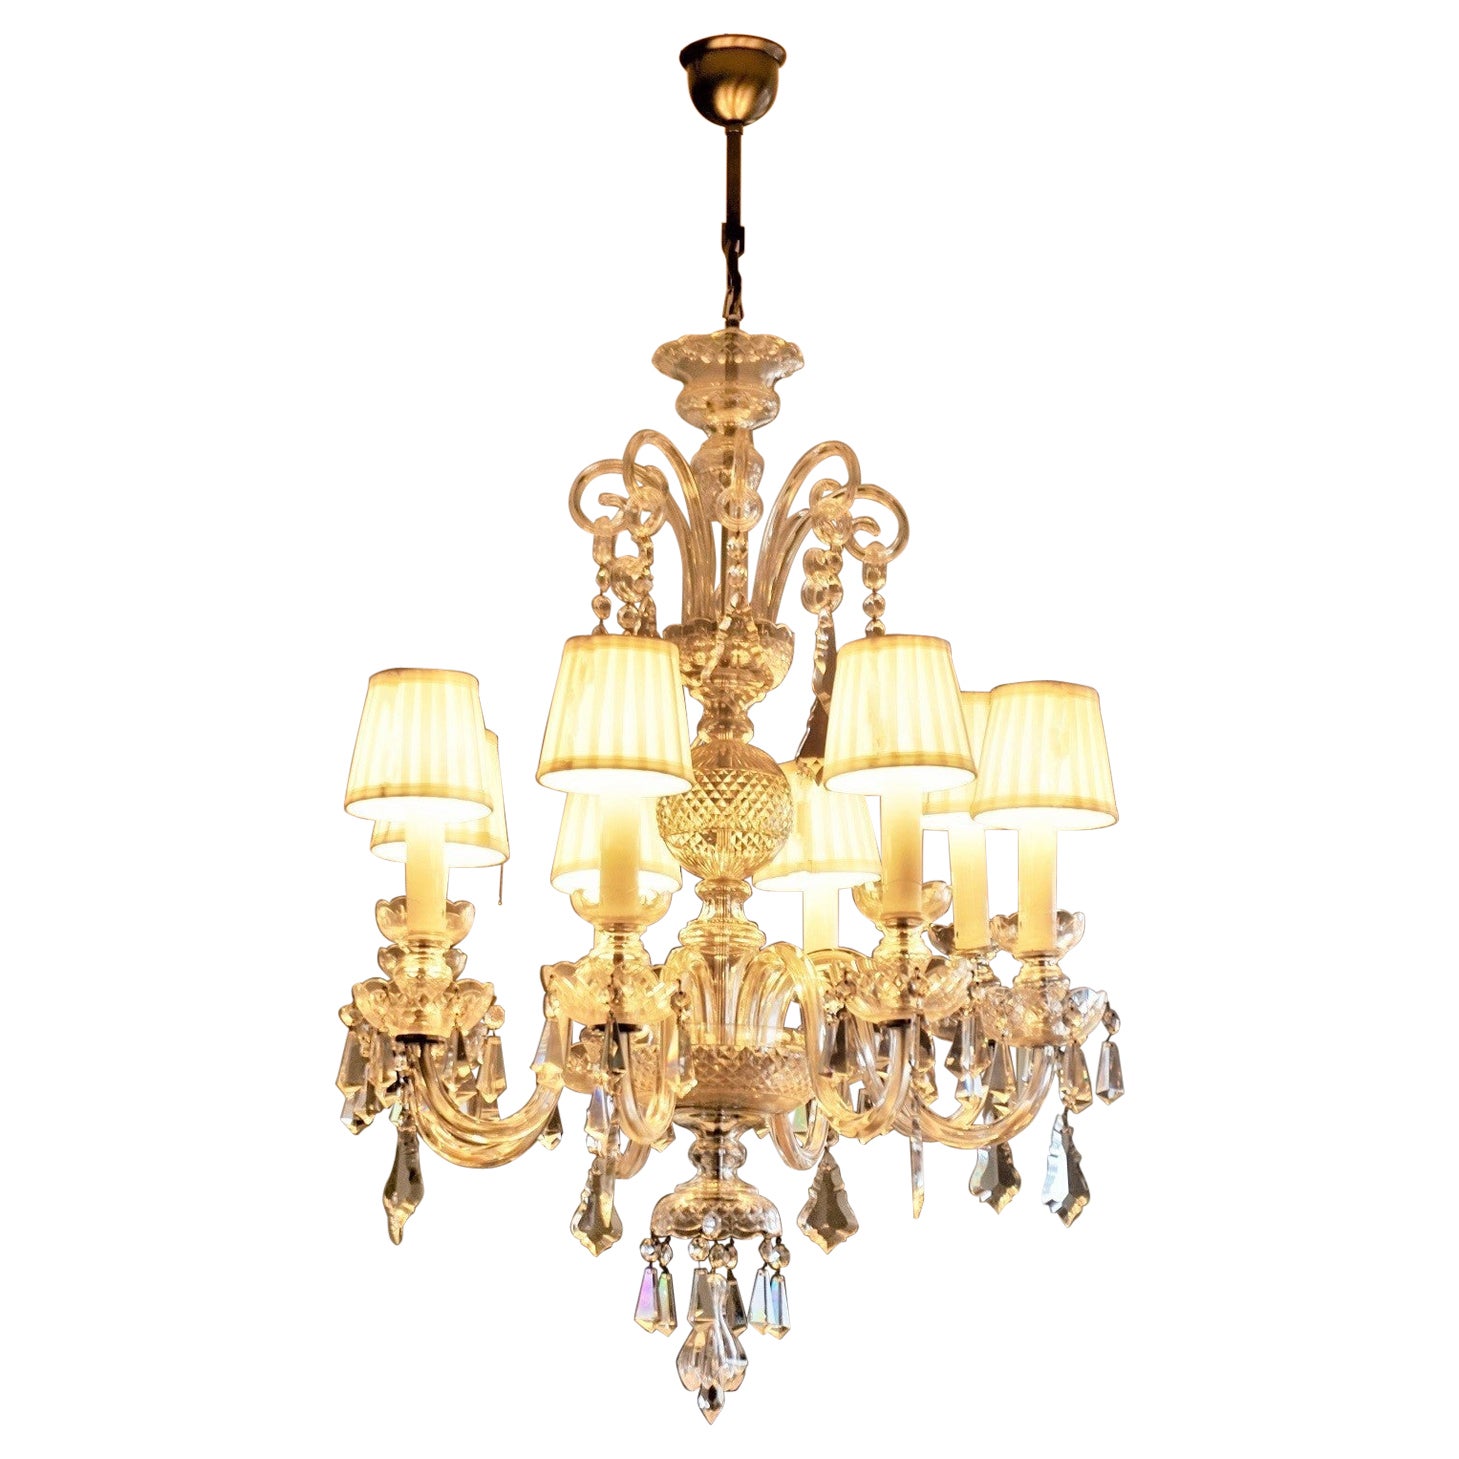 Silvered Murano Glass Crystal Eight-Light Chandelier, Italy, 1910-1920 For Sale